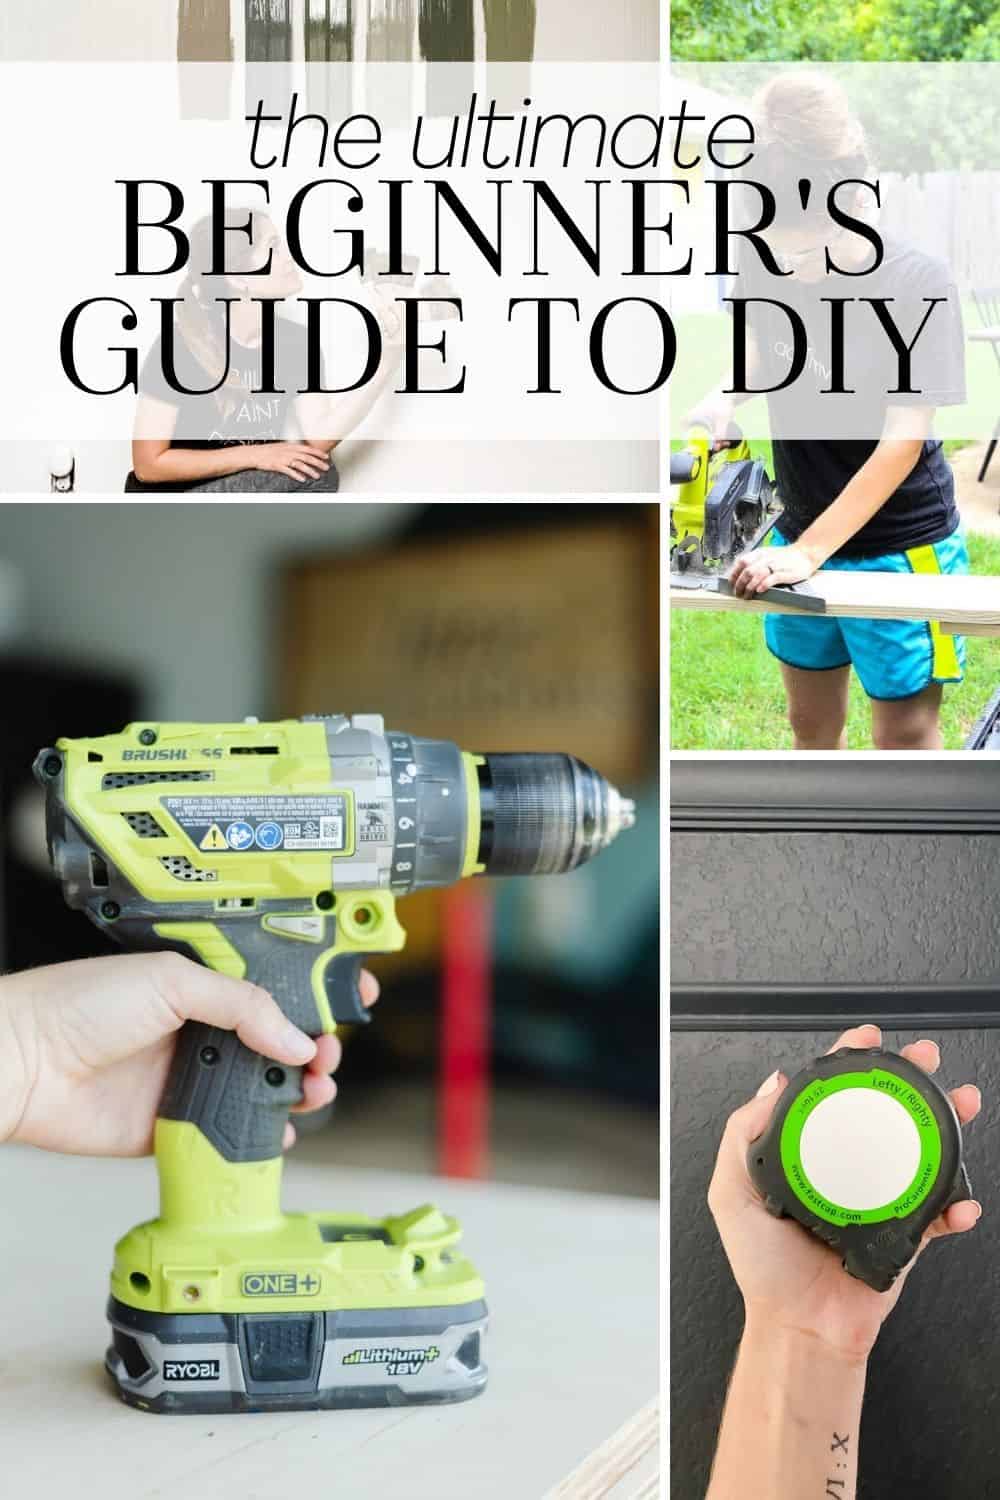 The Ultimate Beginner’s Guide to DIY